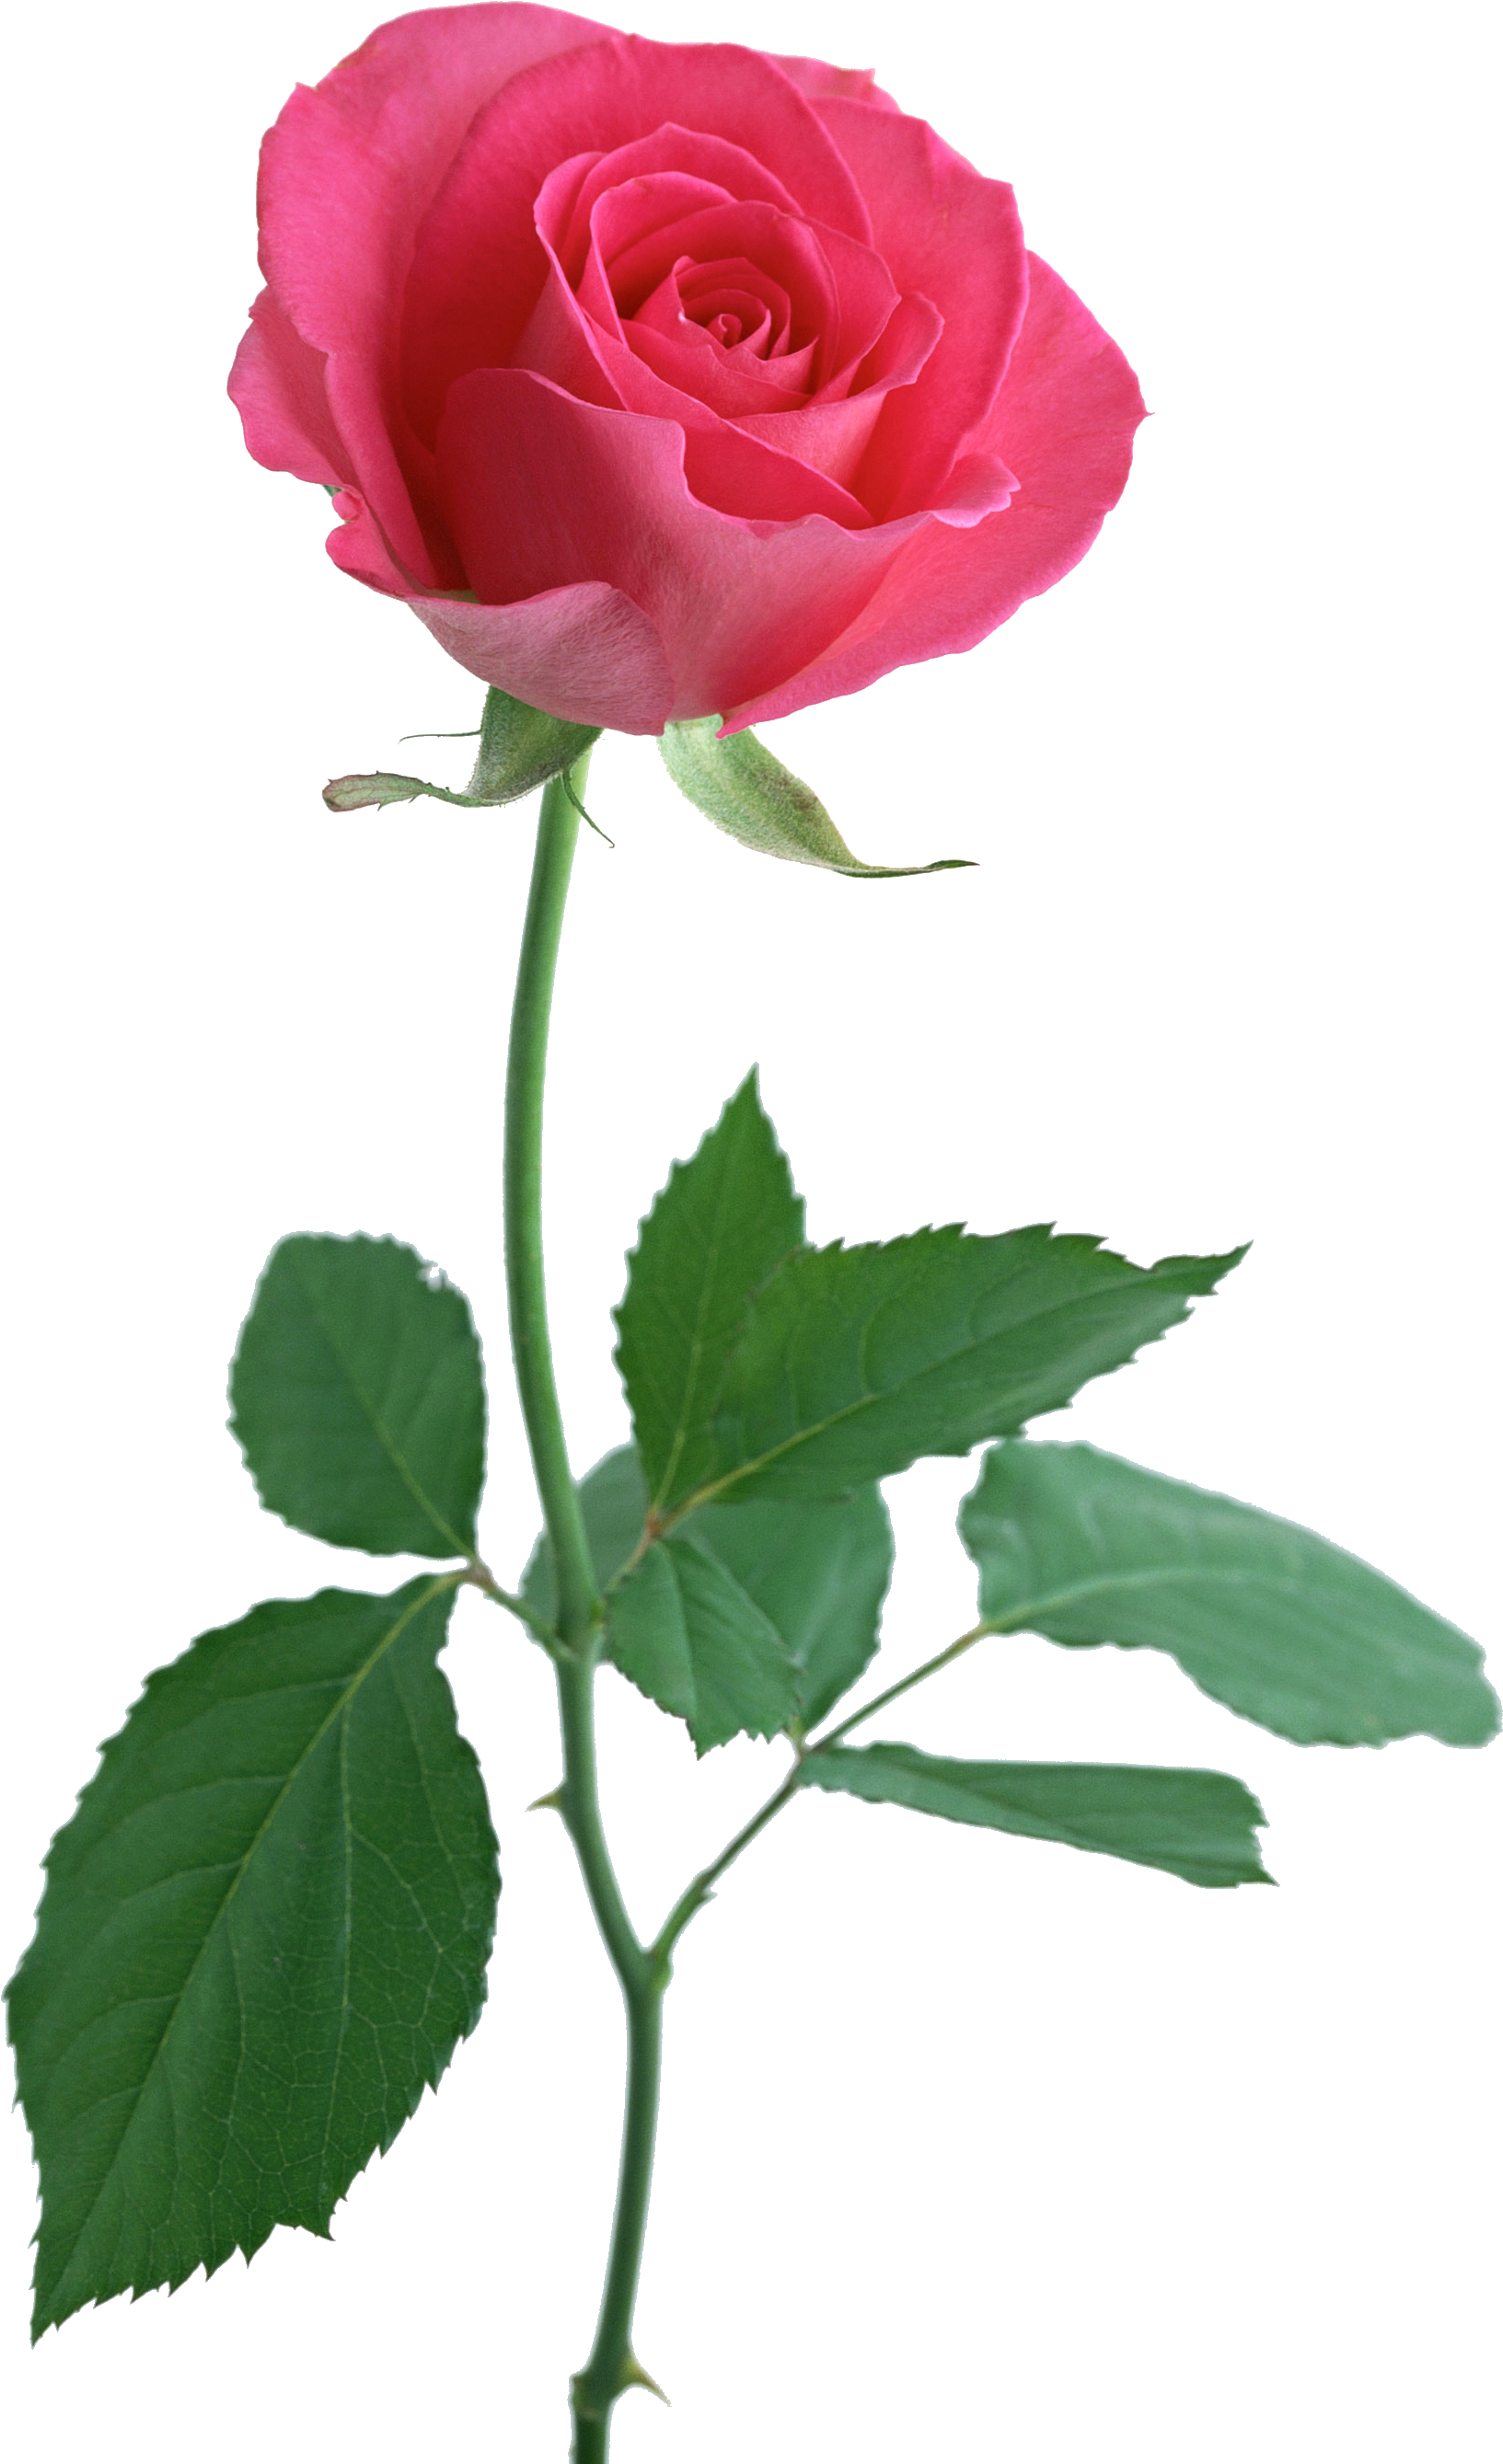 Pink Rose With Stem (2094x2950)